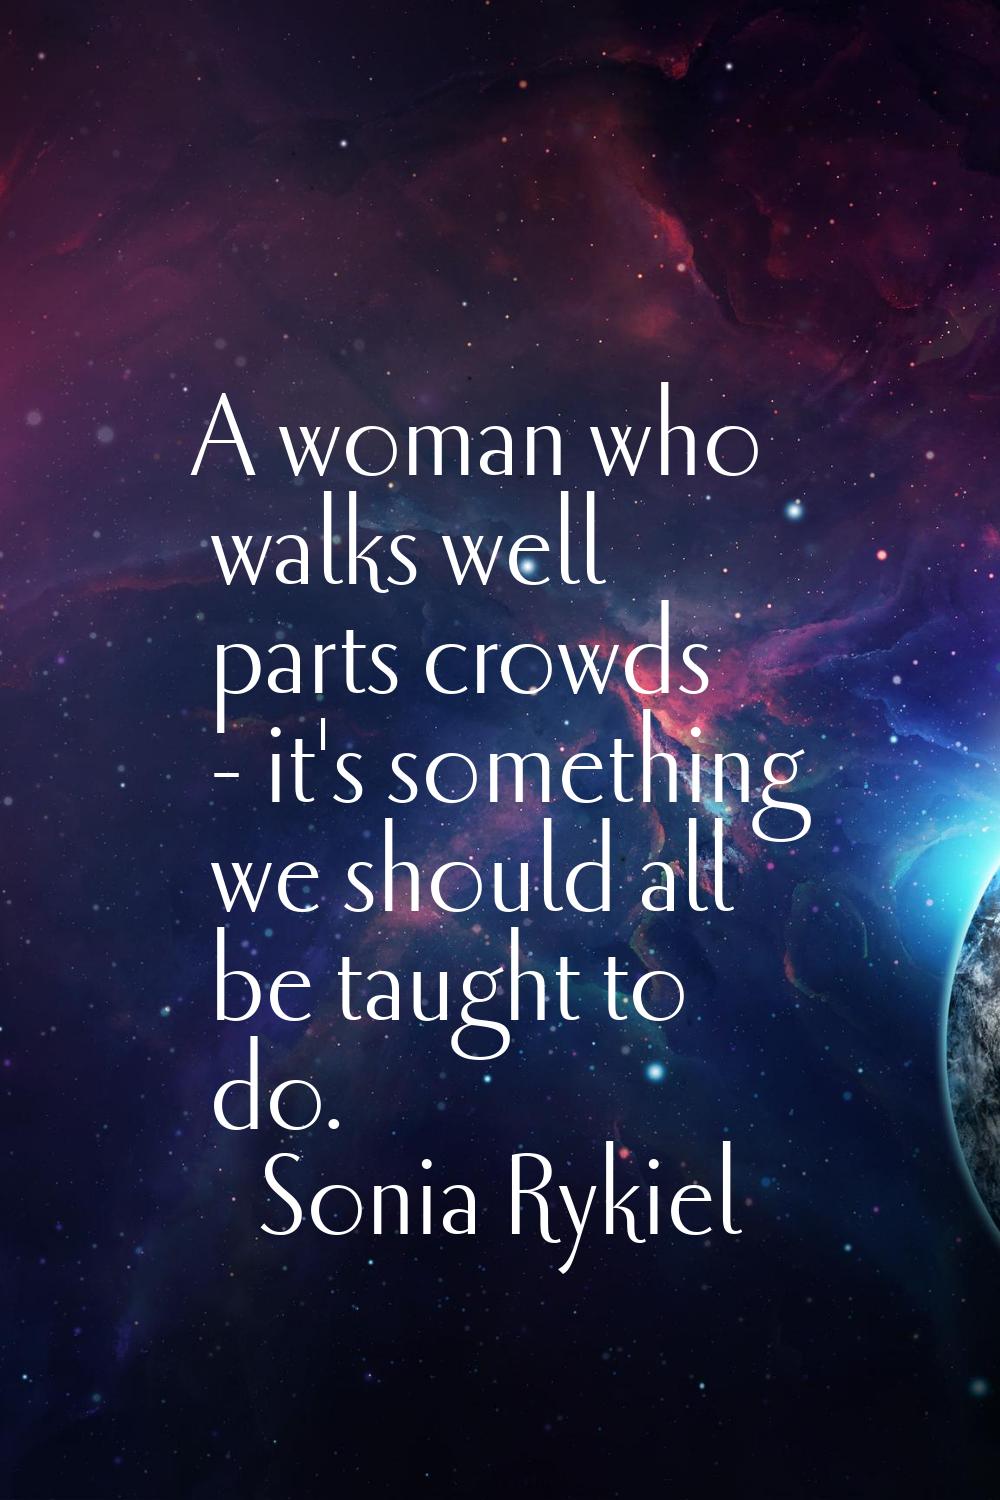 A woman who walks well parts crowds - it's something we should all be taught to do.